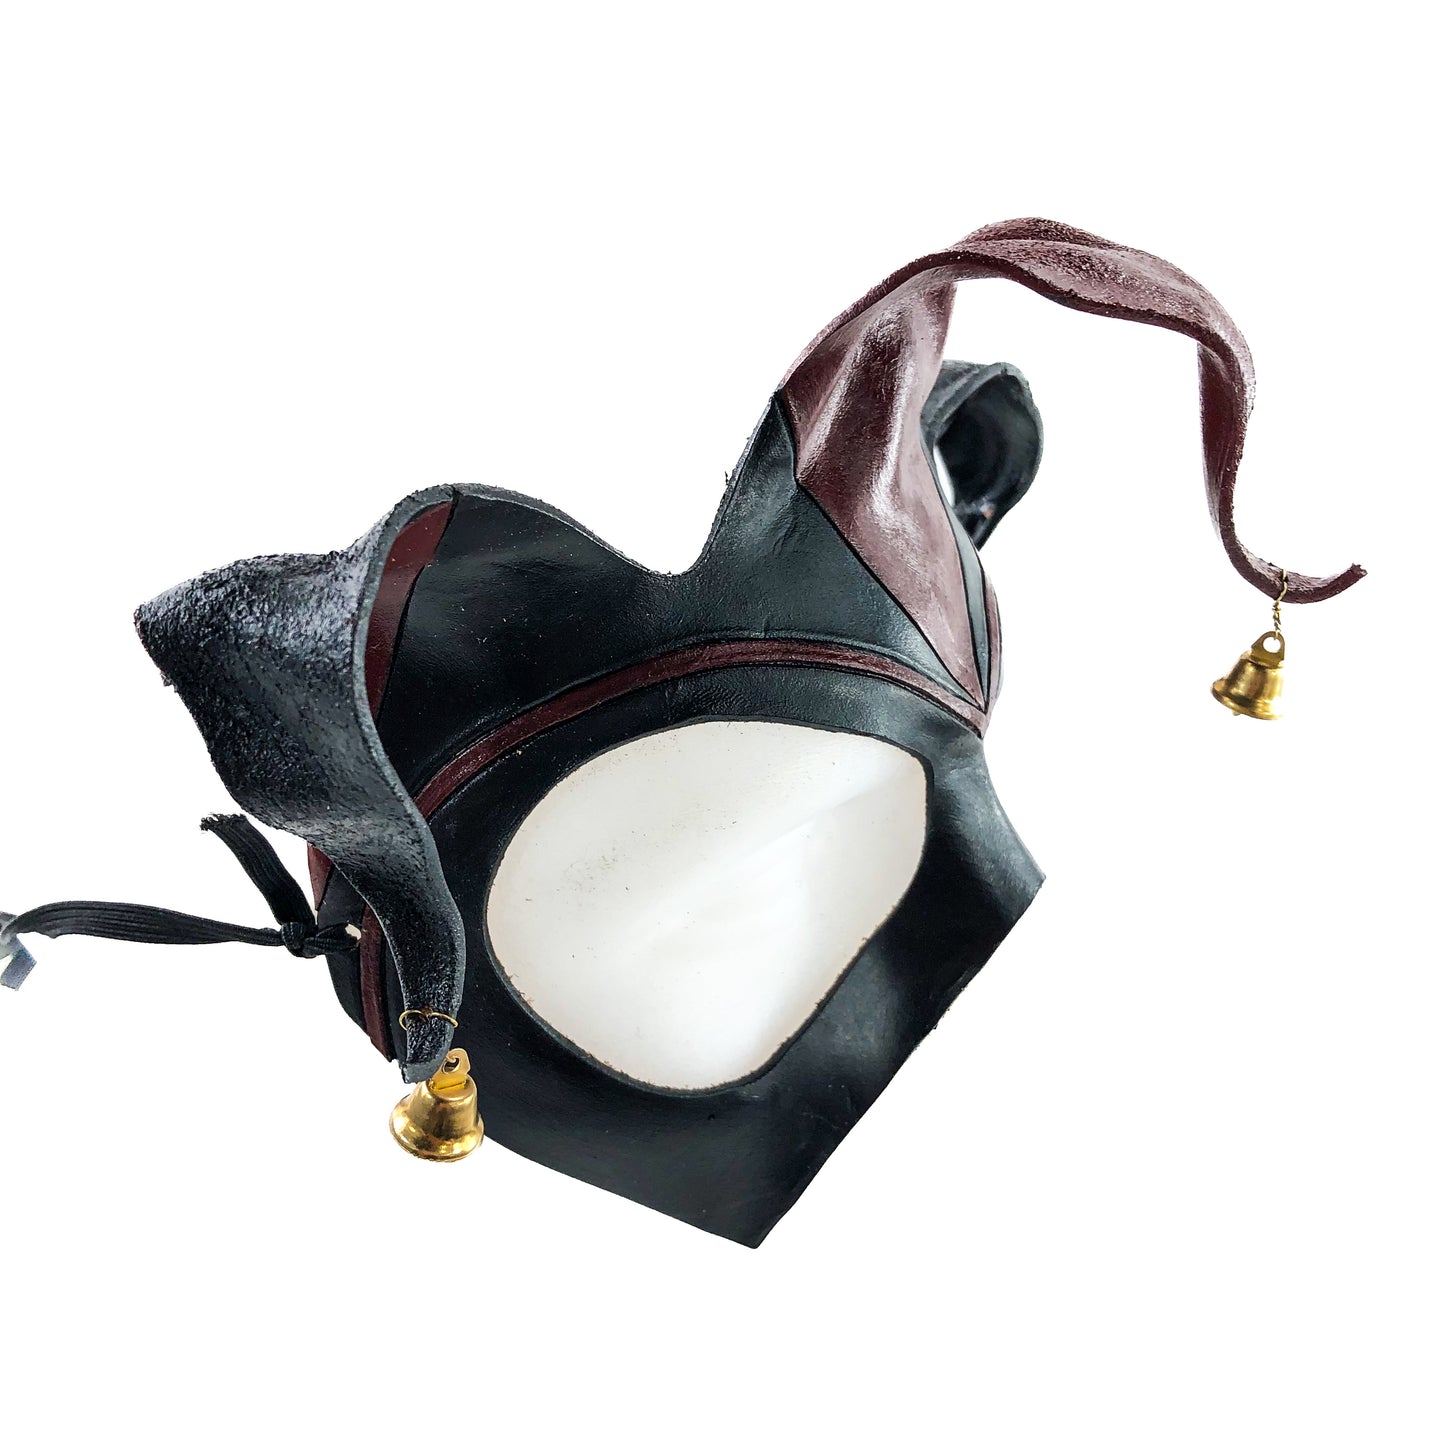 Handmade Genuine Leather Jester Mask in Red and Black with Brass Bells